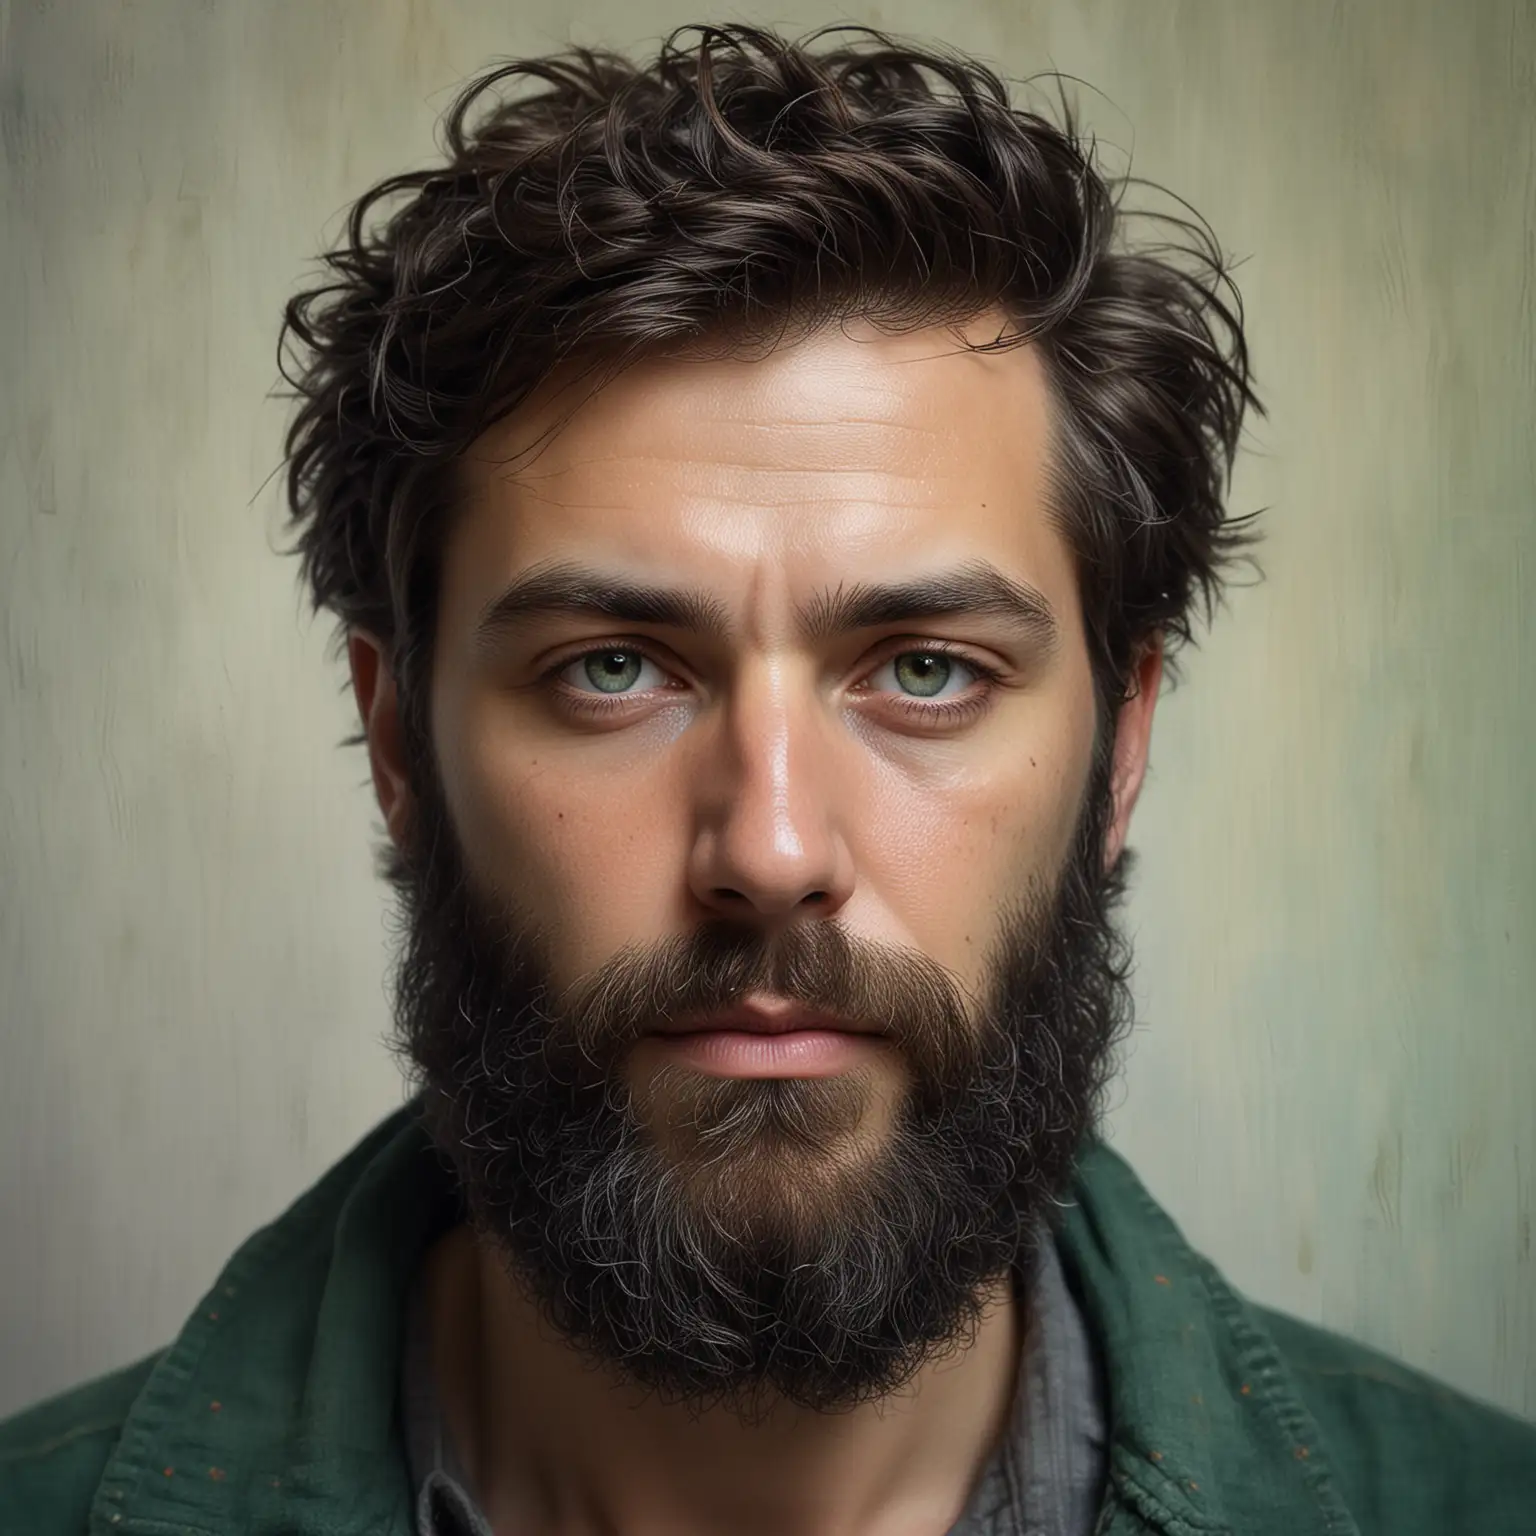 Create a highly detailed and expressive portrait of a bearded man in a contemplative pose. The artwork should be done in a painterly style, with visible brushstrokes and a mix of colors. The man's face is turned slightly upward and to the side, with a thoughtful and serene expression. He has a well-groomed, full beard and short, dark hair. His skin is depicted with a combination of light and shadow, creating a sense of depth. The color palette should include shades of green, blue, and hints of purple, adding a dynamic and emotional quality to the image. The background should be abstract and soft, using light colors like pale blue and white to contrast with the darker tones of the man's features. The overall mood of the portrait should be reflective and peaceful.